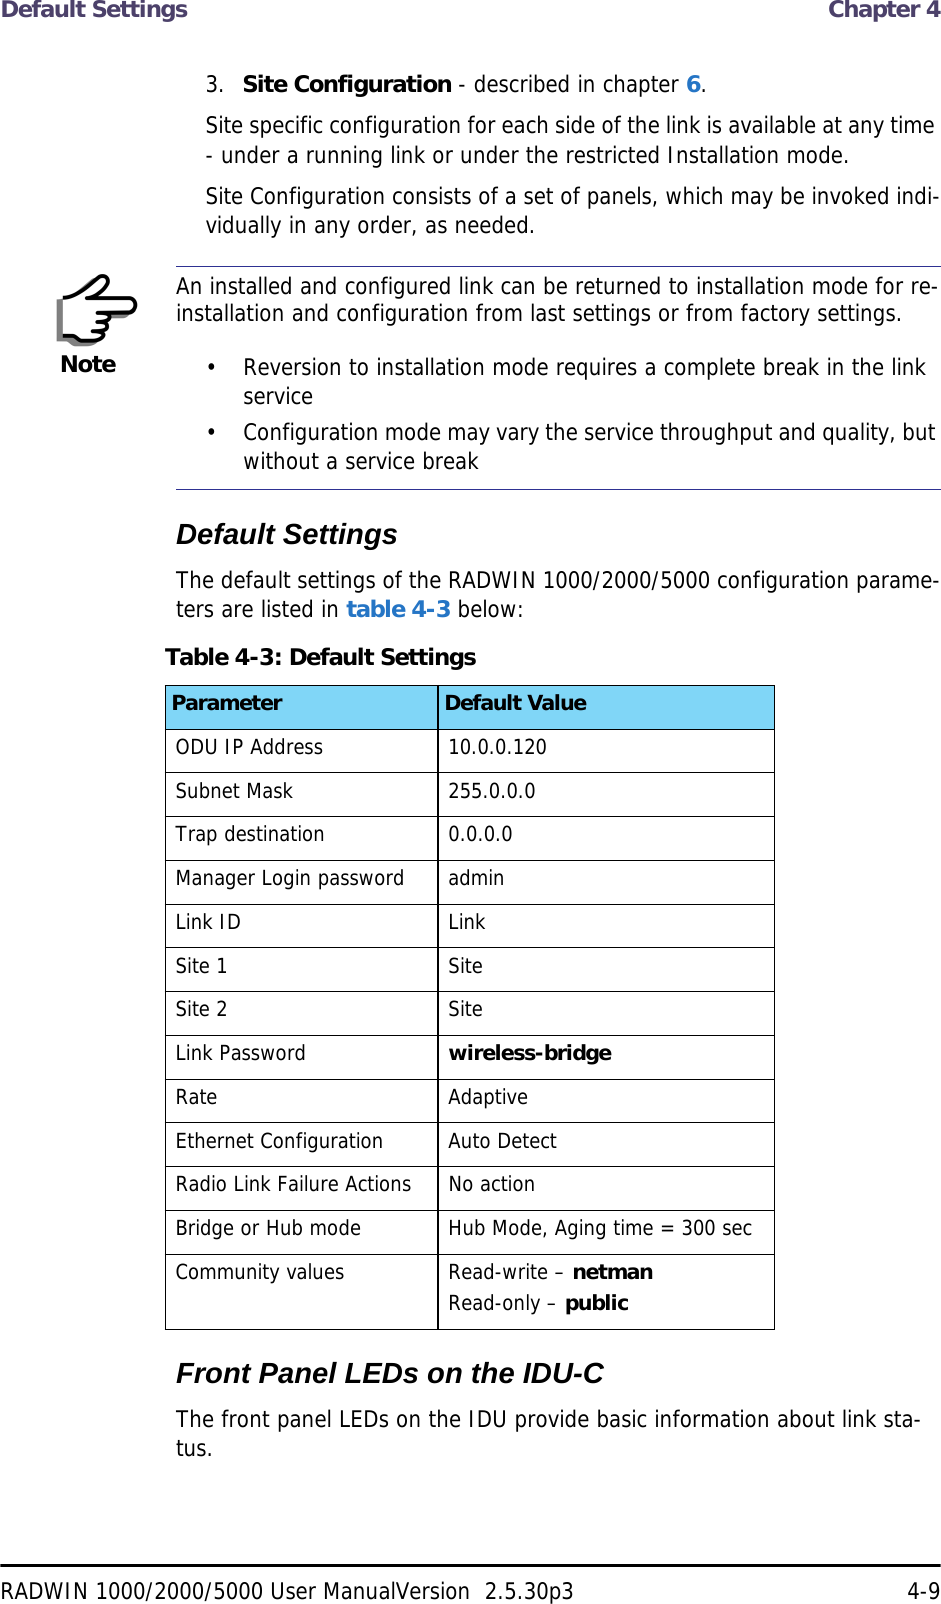 Default Settings  Chapter 4RADWIN 1000/2000/5000 User ManualVersion  2.5.30p3 4-93.  Site Configuration - described in chapter 6.Site specific configuration for each side of the link is available at any time - under a running link or under the restricted Installation mode.Site Configuration consists of a set of panels, which may be invoked indi-vidually in any order, as needed.Default SettingsThe default settings of the RADWIN 1000/2000/5000 configuration parame-ters are listed in table 4-3 below:Front Panel LEDs on the IDU-CThe front panel LEDs on the IDU provide basic information about link sta-tus. NoteAn installed and configured link can be returned to installation mode for re-installation and configuration from last settings or from factory settings.• Reversion to installation mode requires a complete break in the link service• Configuration mode may vary the service throughput and quality, but without a service breakTable 4-3: Default SettingsParameter Default ValueODU IP Address 10.0.0.120Subnet Mask 255.0.0.0Trap destination 0.0.0.0Manager Login password adminLink ID Link Site 1 SiteSite 2 SiteLink Password wireless-bridgeRate AdaptiveEthernet Configuration Auto DetectRadio Link Failure Actions No actionBridge or Hub mode Hub Mode, Aging time = 300 secCommunity values Read-write – netmanRead-only – public